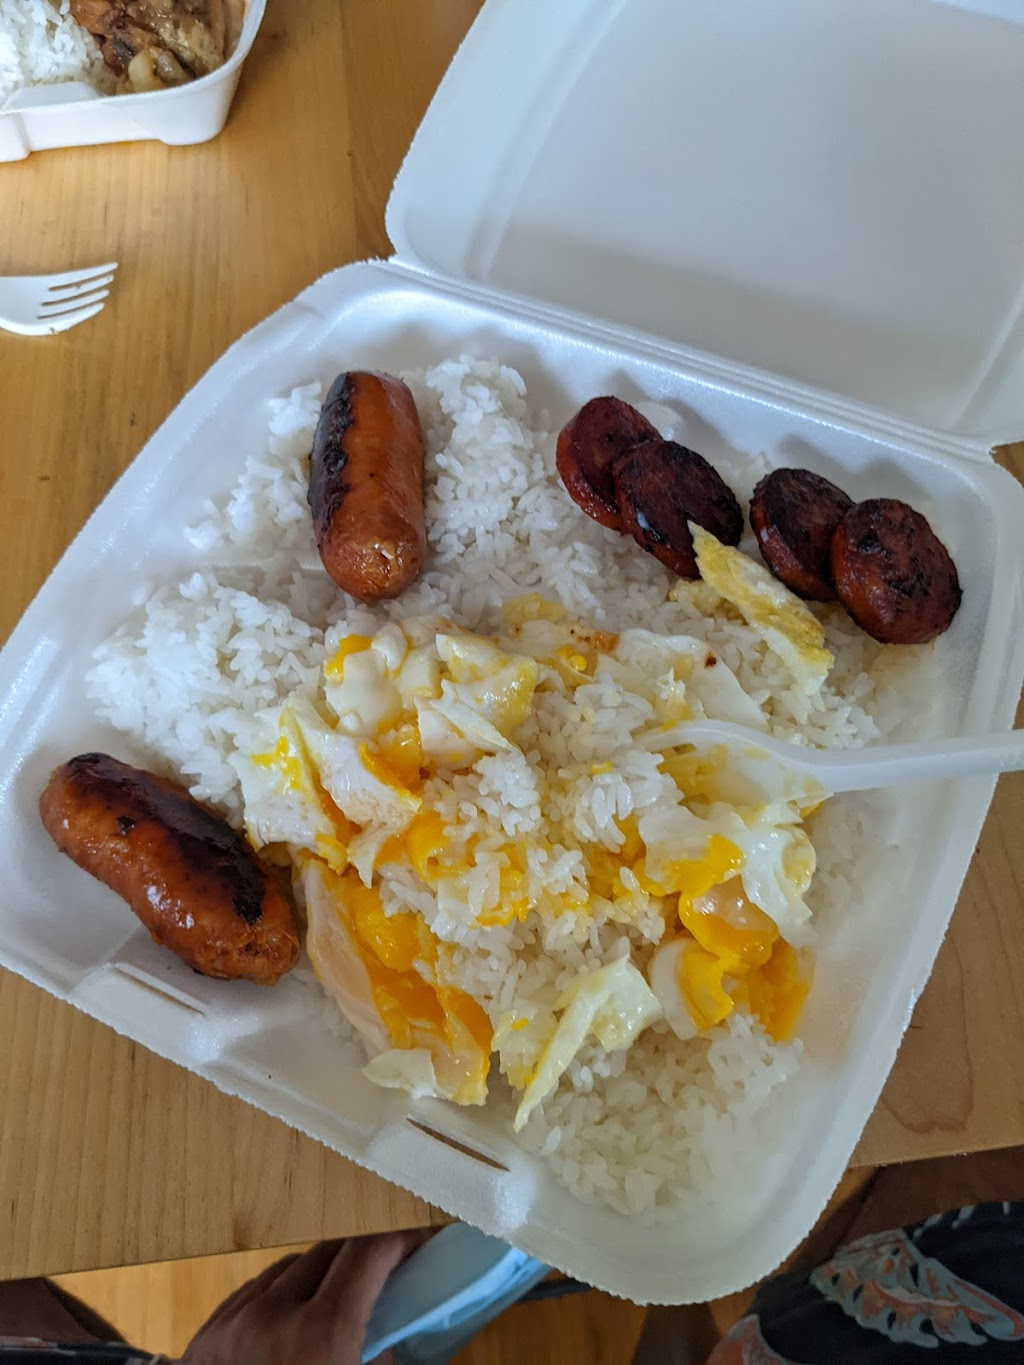 Kens In Plus Out Plate Lunch | 41-1537 Kalanianaʻole Hwy, Waimanalo, HI 96795 | Phone: (808) 259-8900